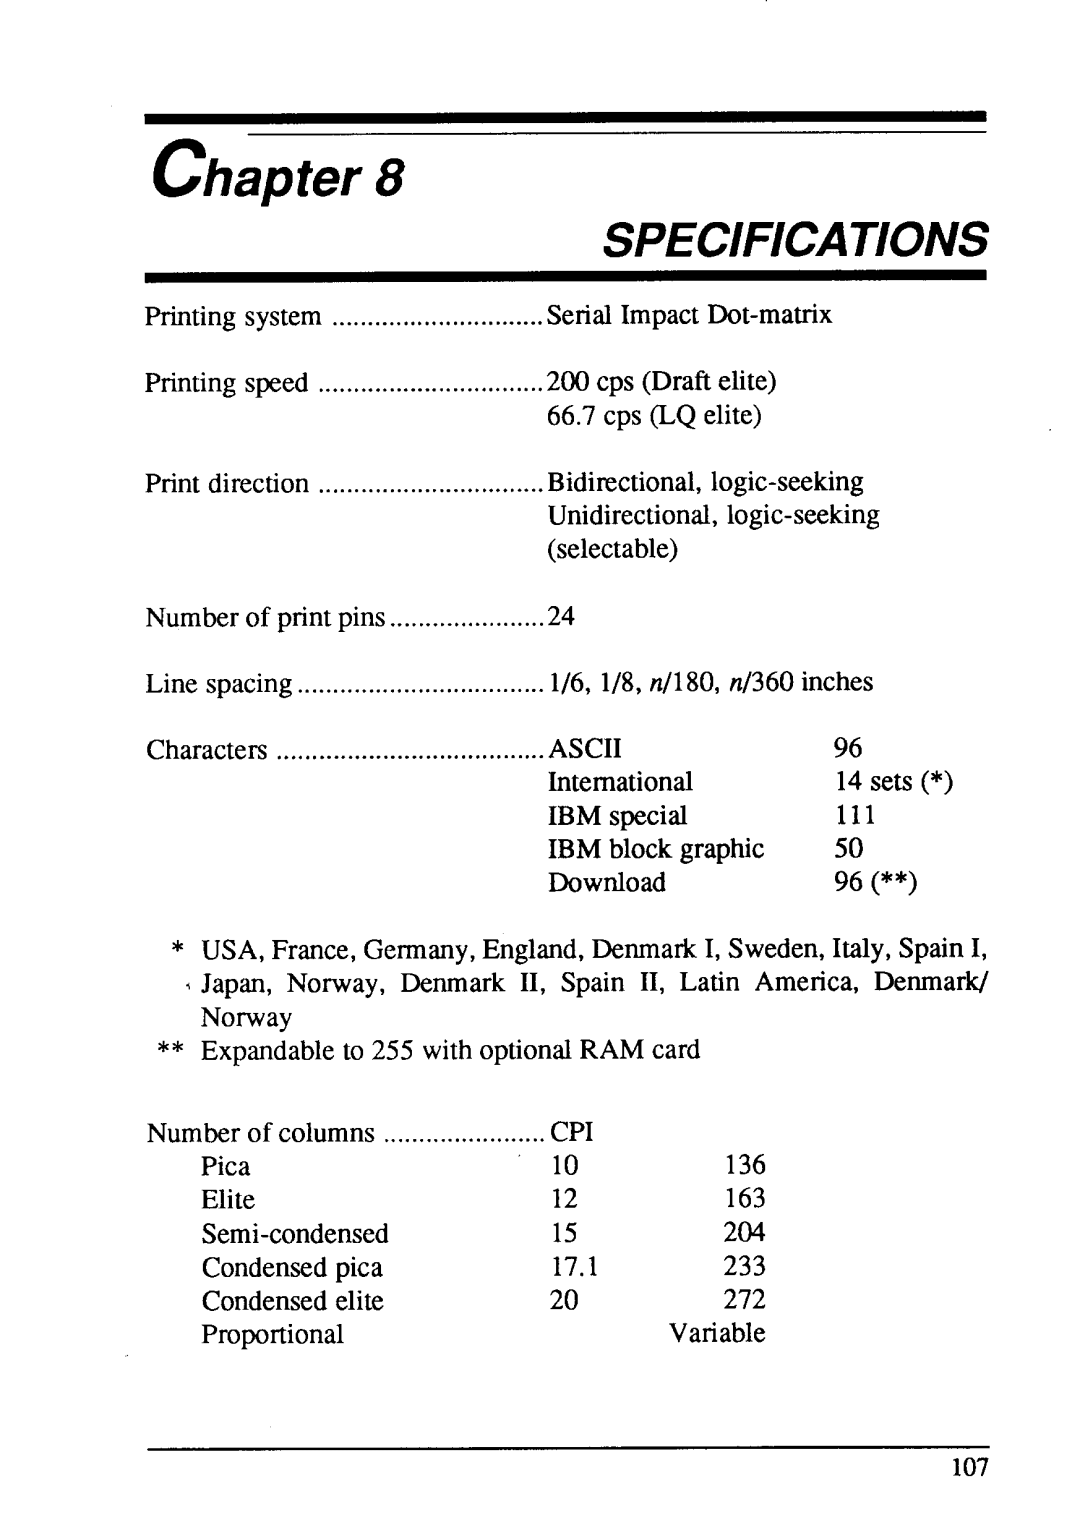 Star Micronics LC24-15 user manual SPEClFlCAllONS, Chapter 